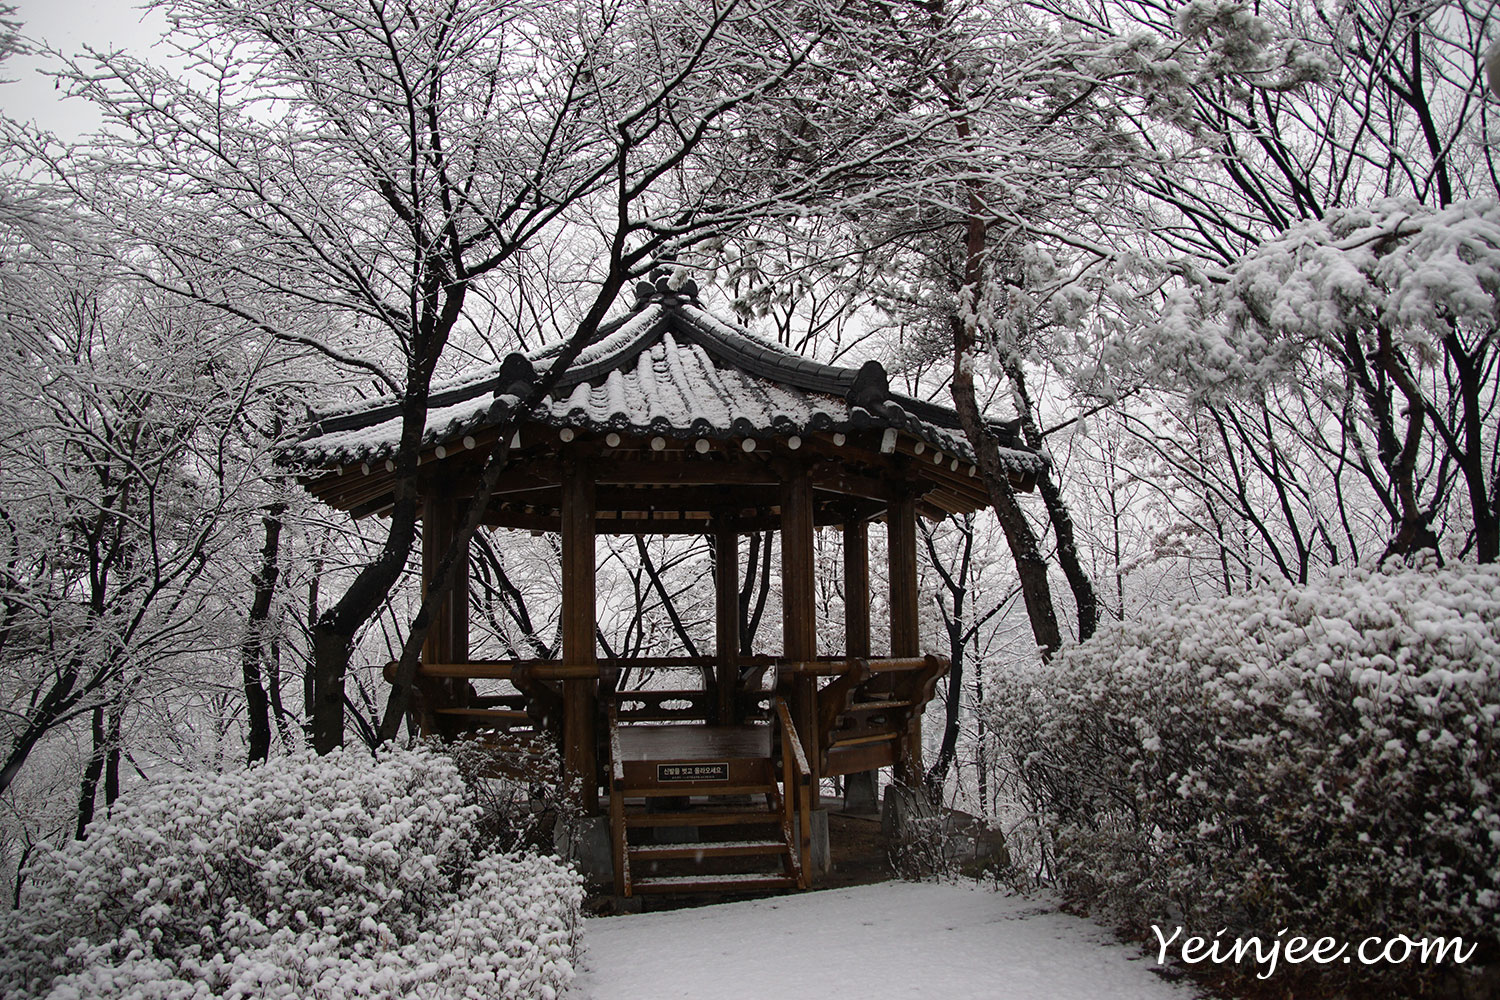 Staying in South Korea for four seasons